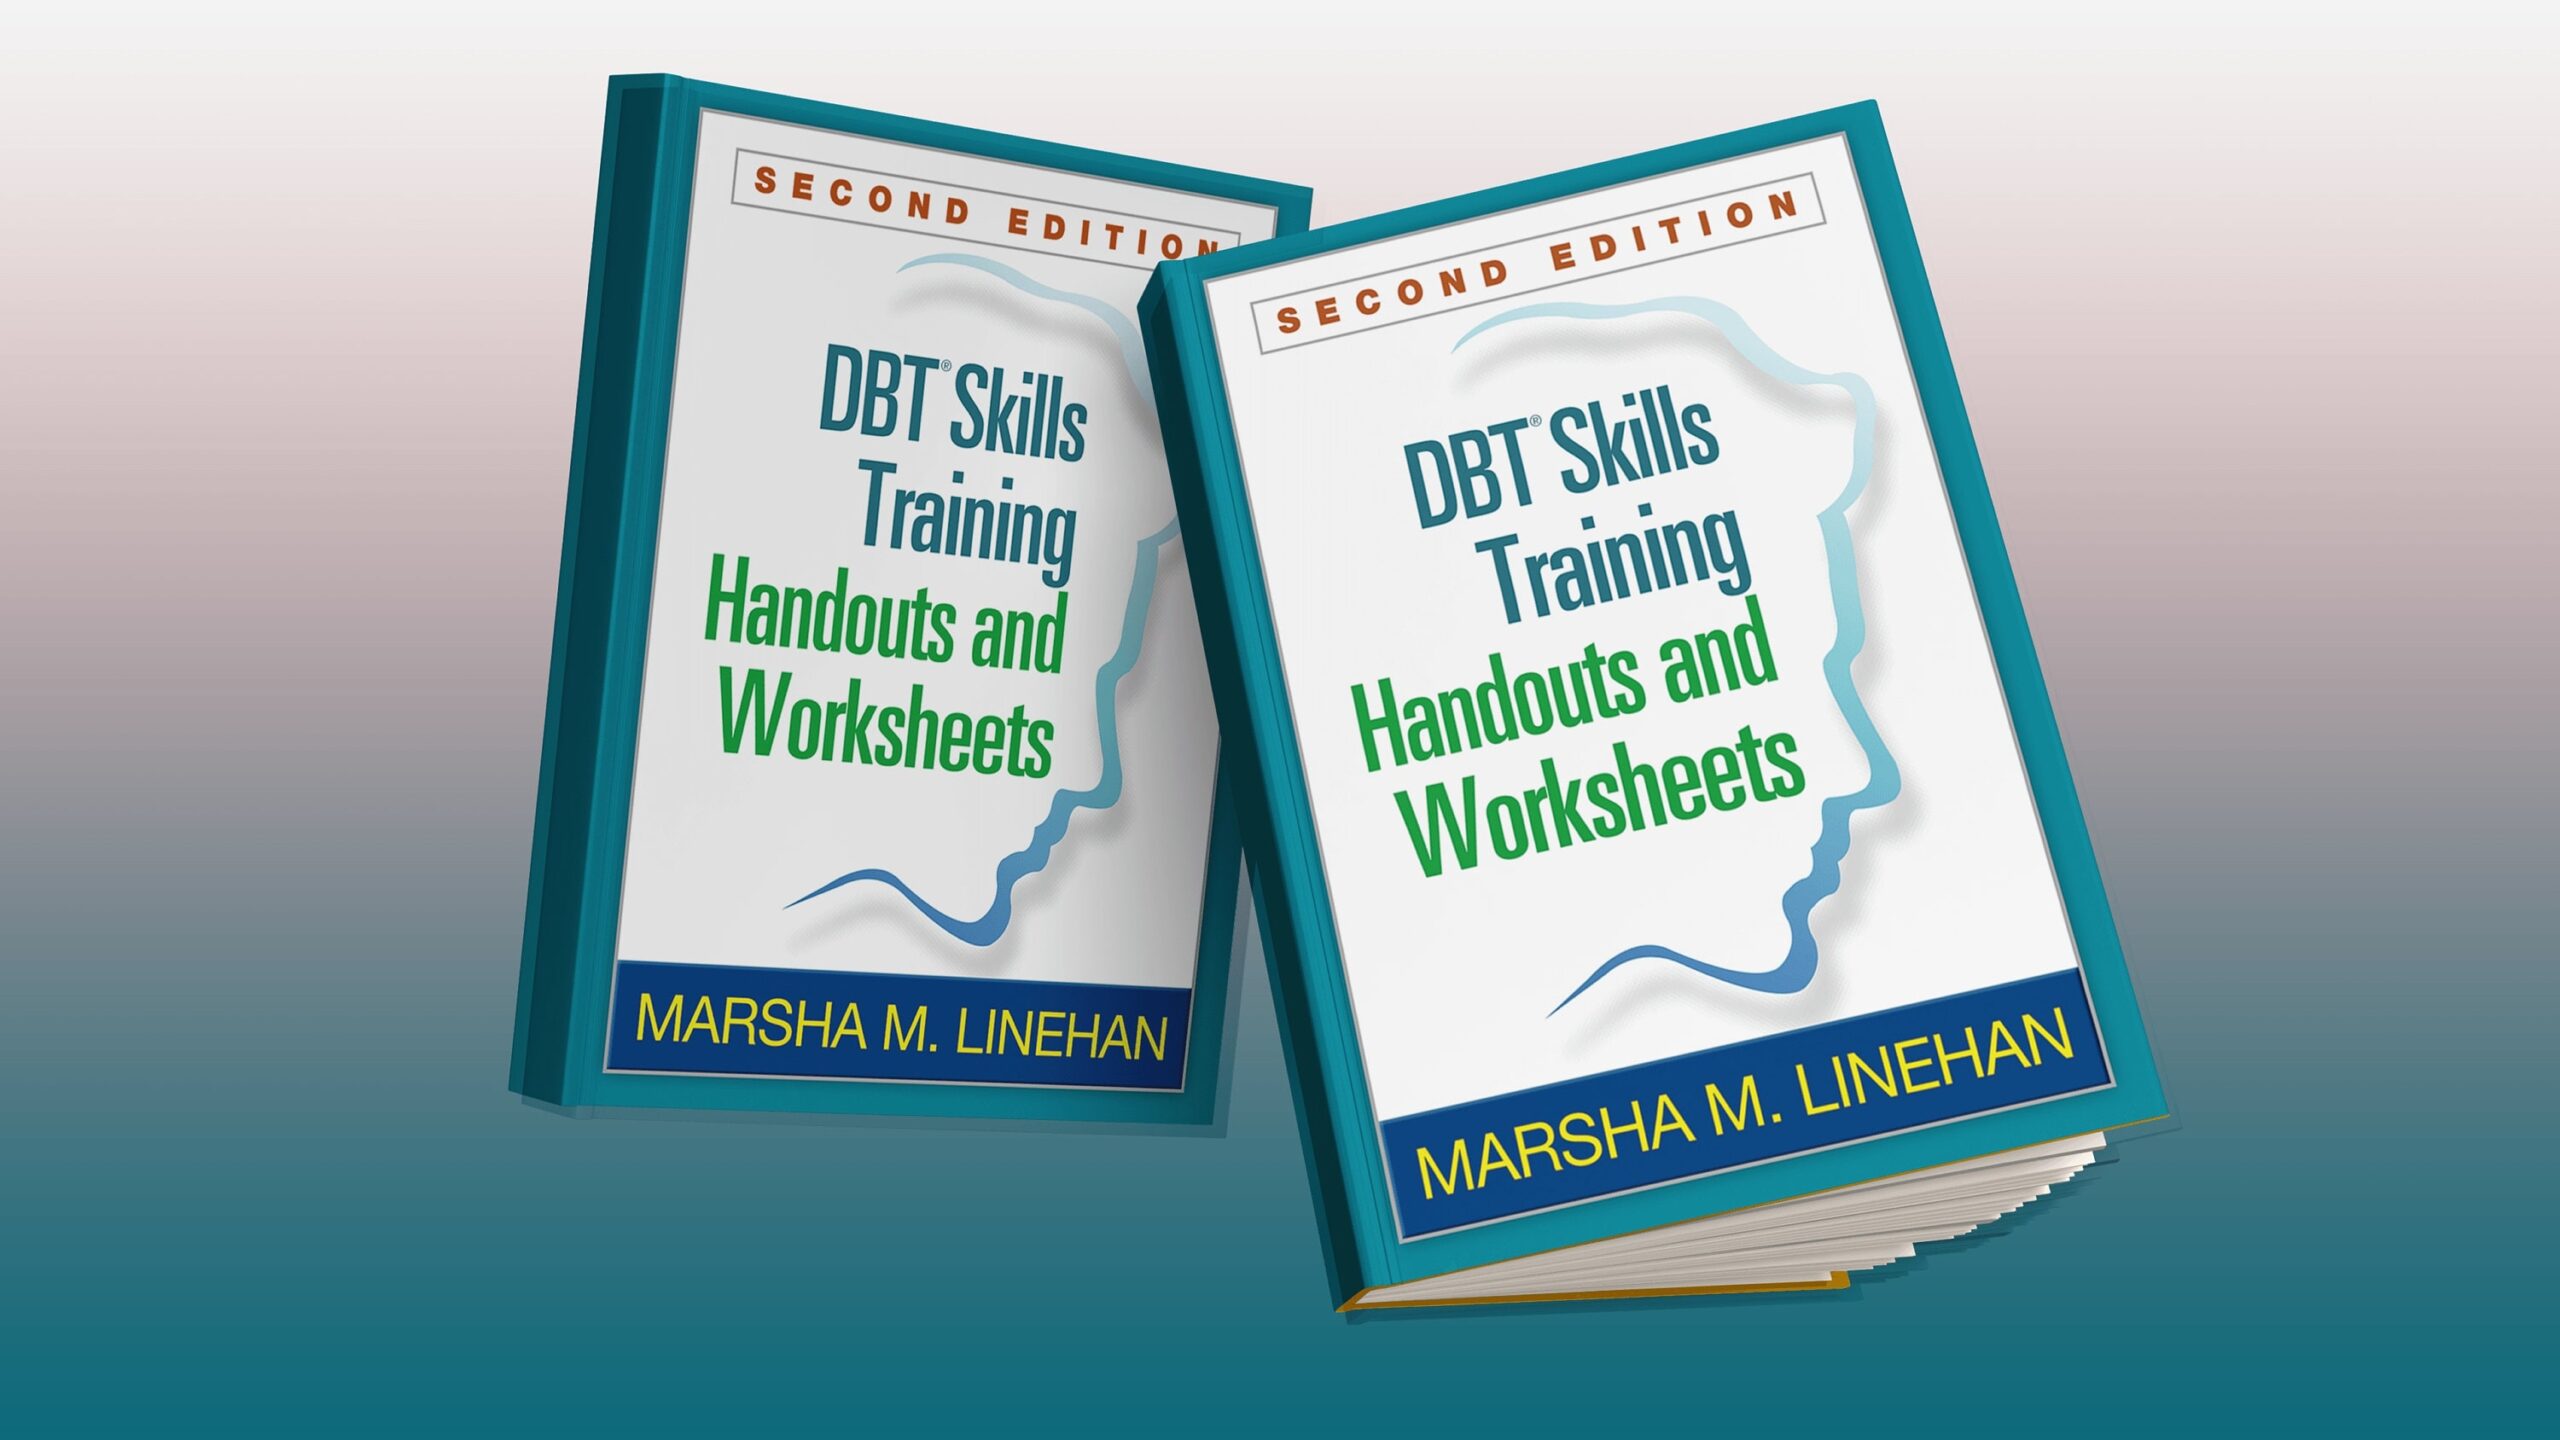 Dbt R Skills Training Handouts And Worksheets Second Edition